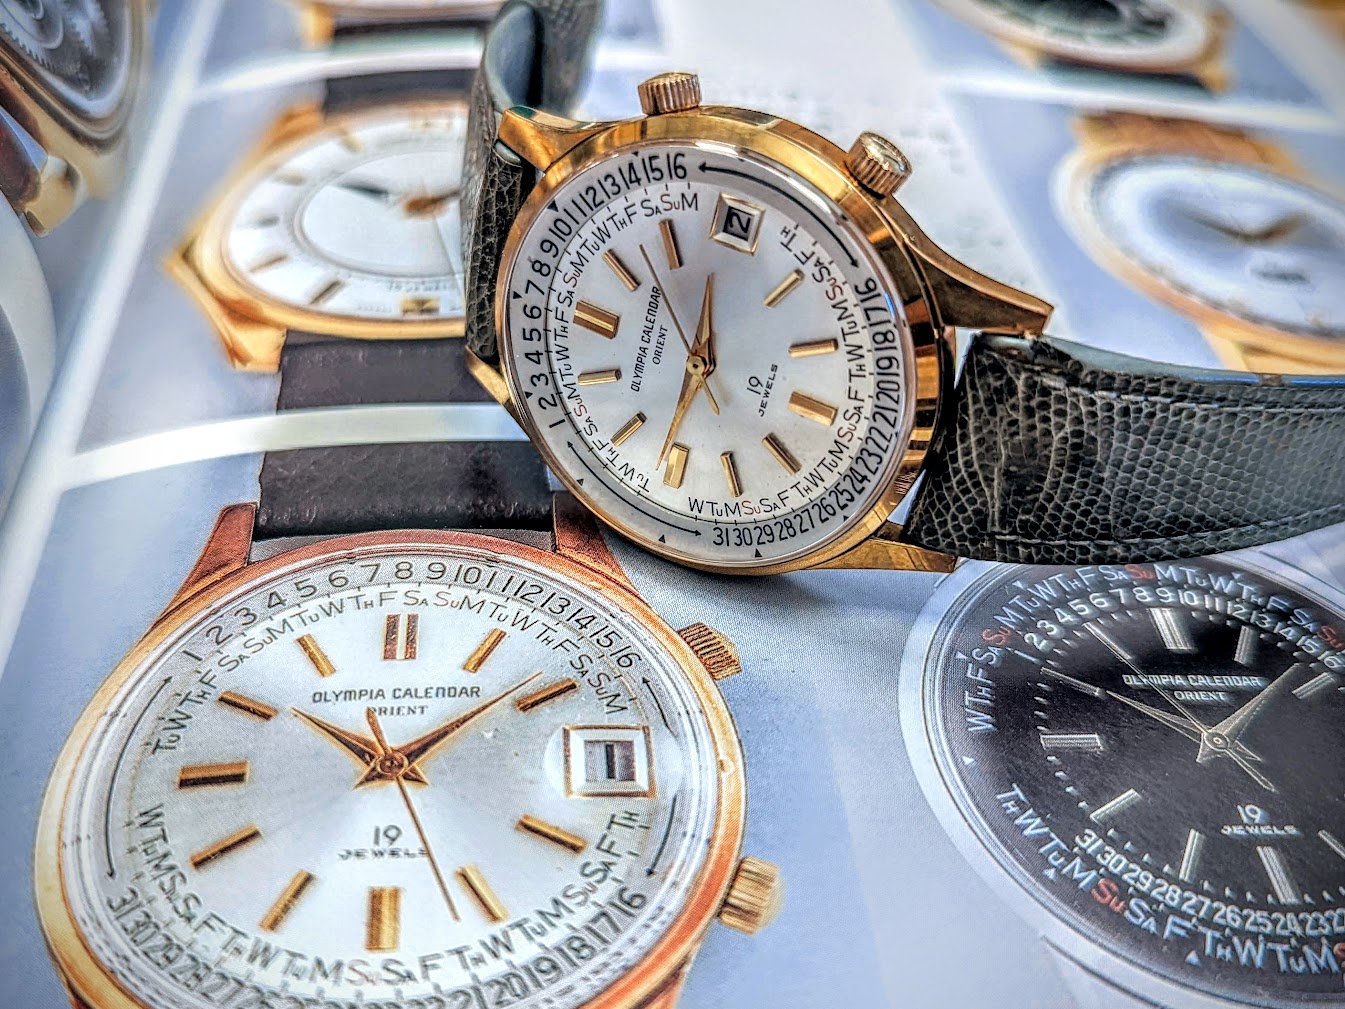 Orient Place - The Place for Orient Watch Collectors and Fans